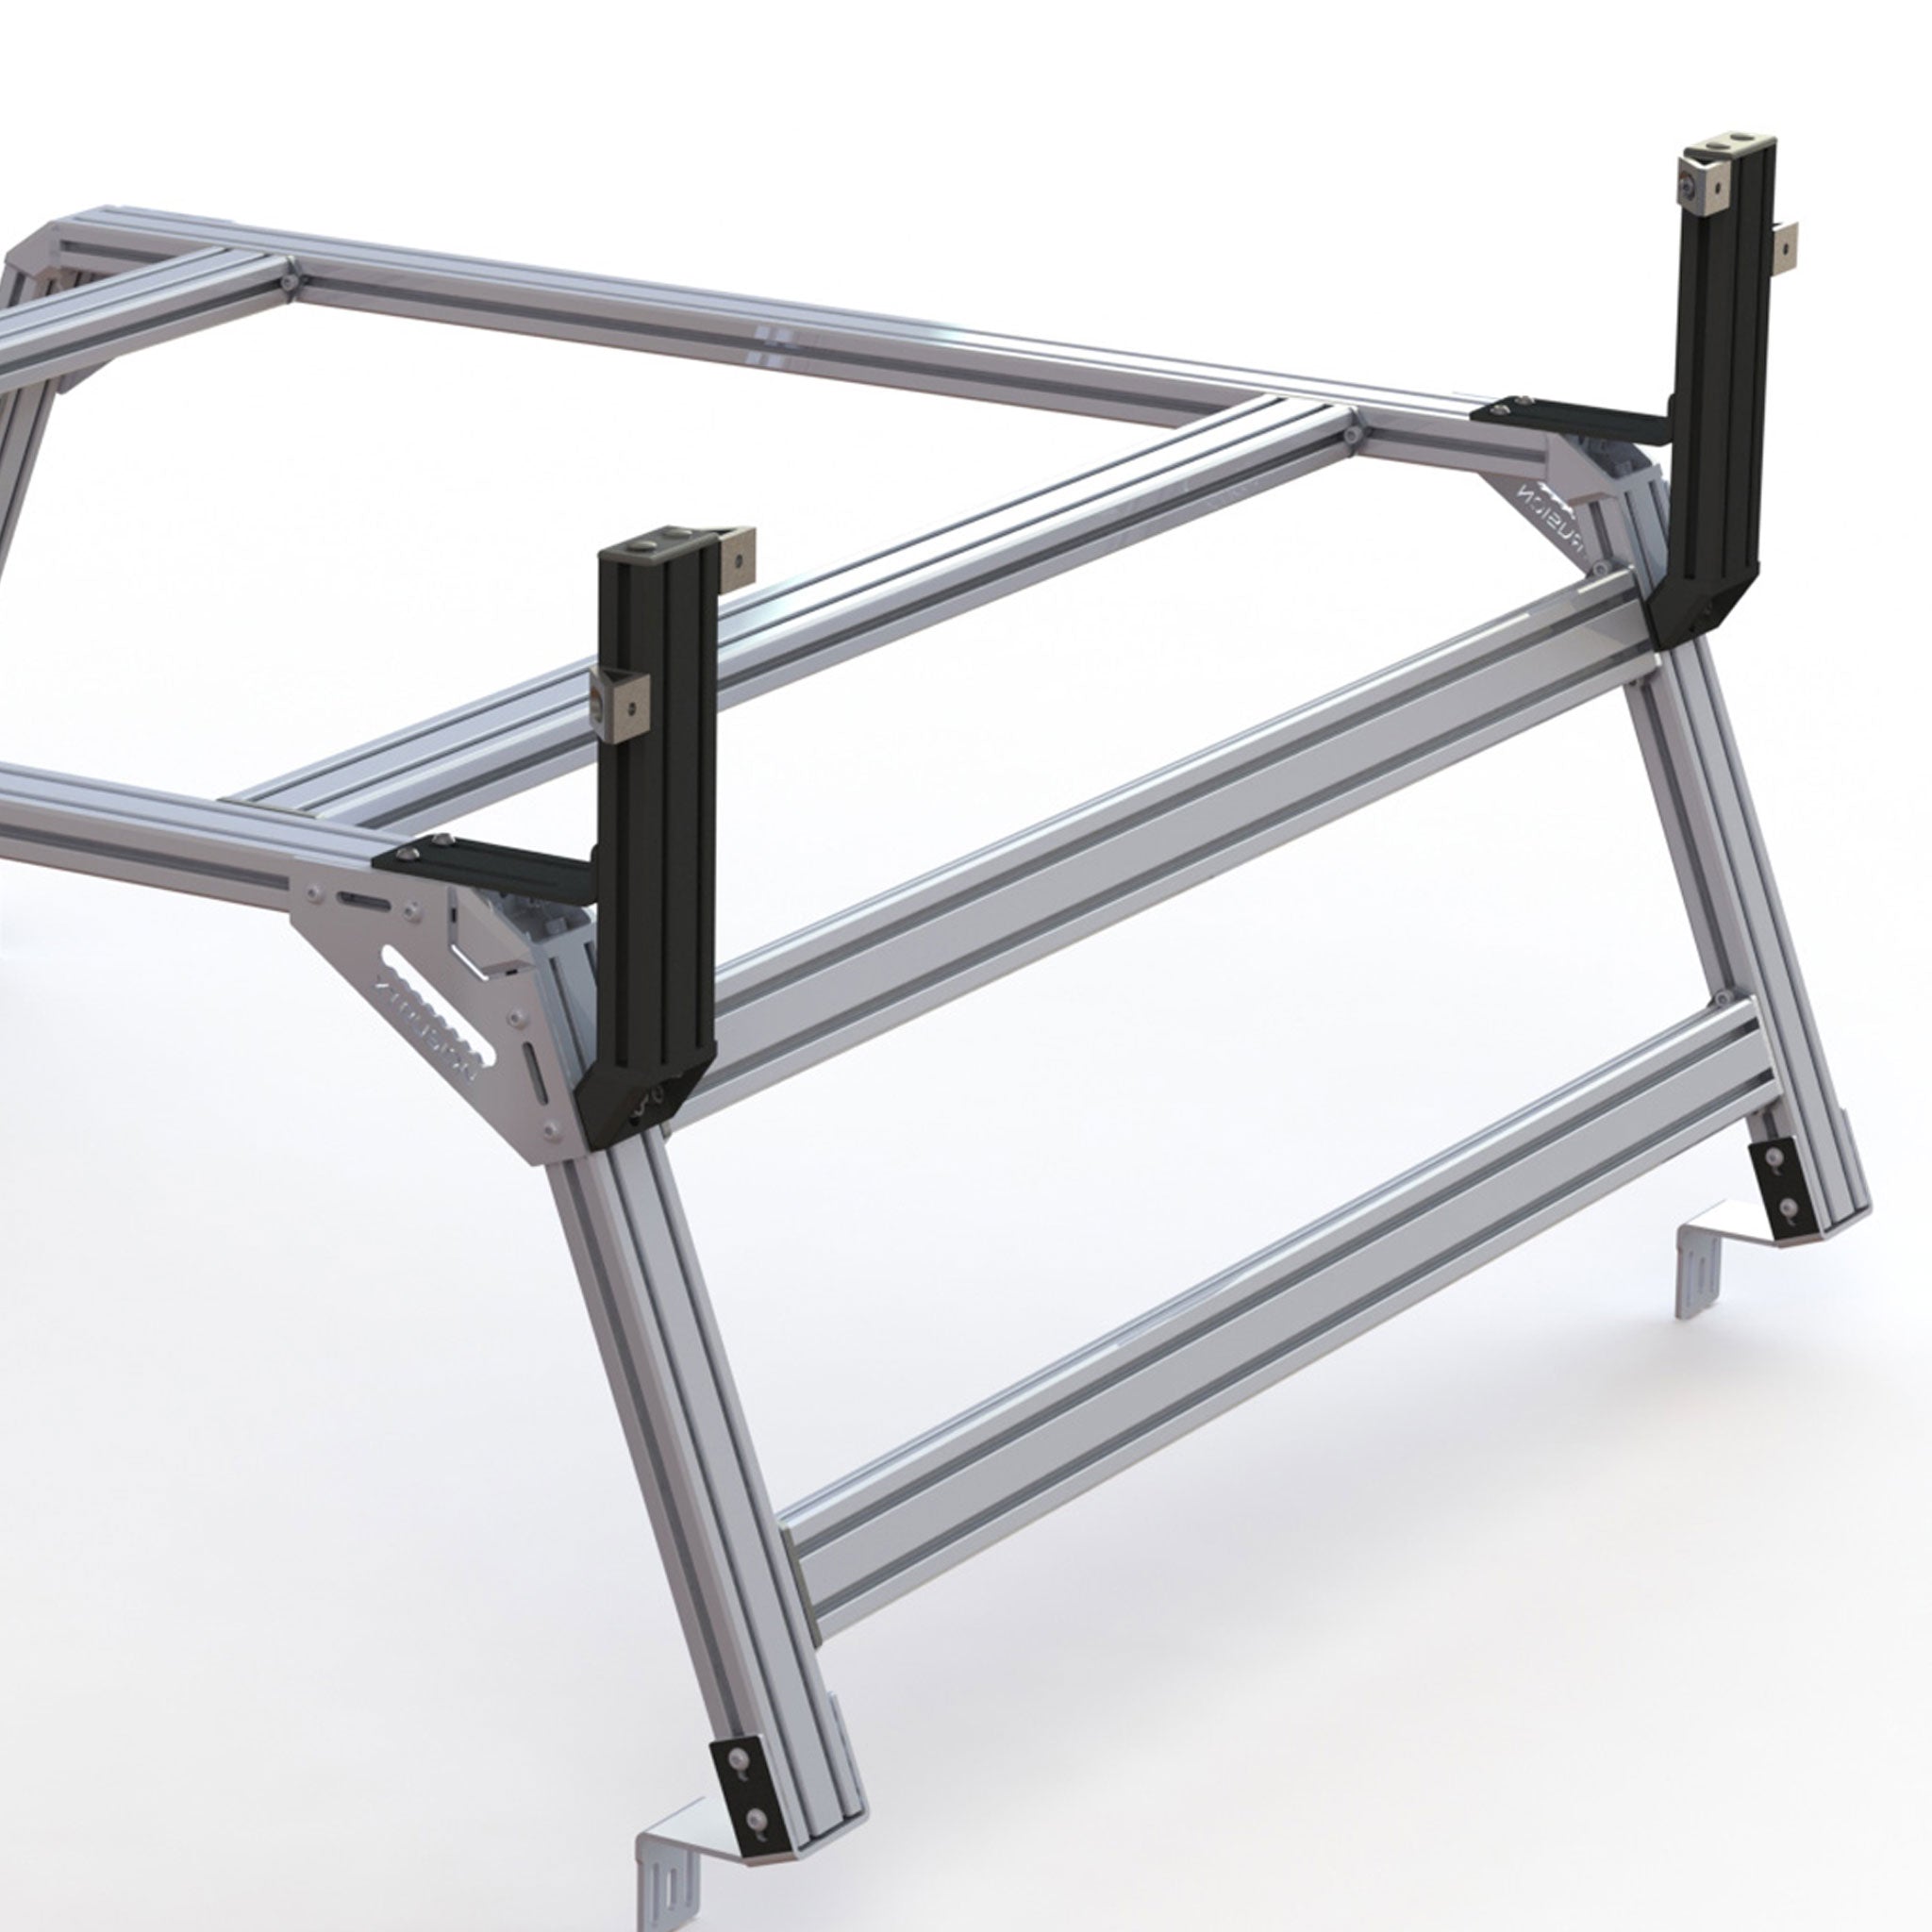 XTR Awning Mount Upright Sub-structure render image